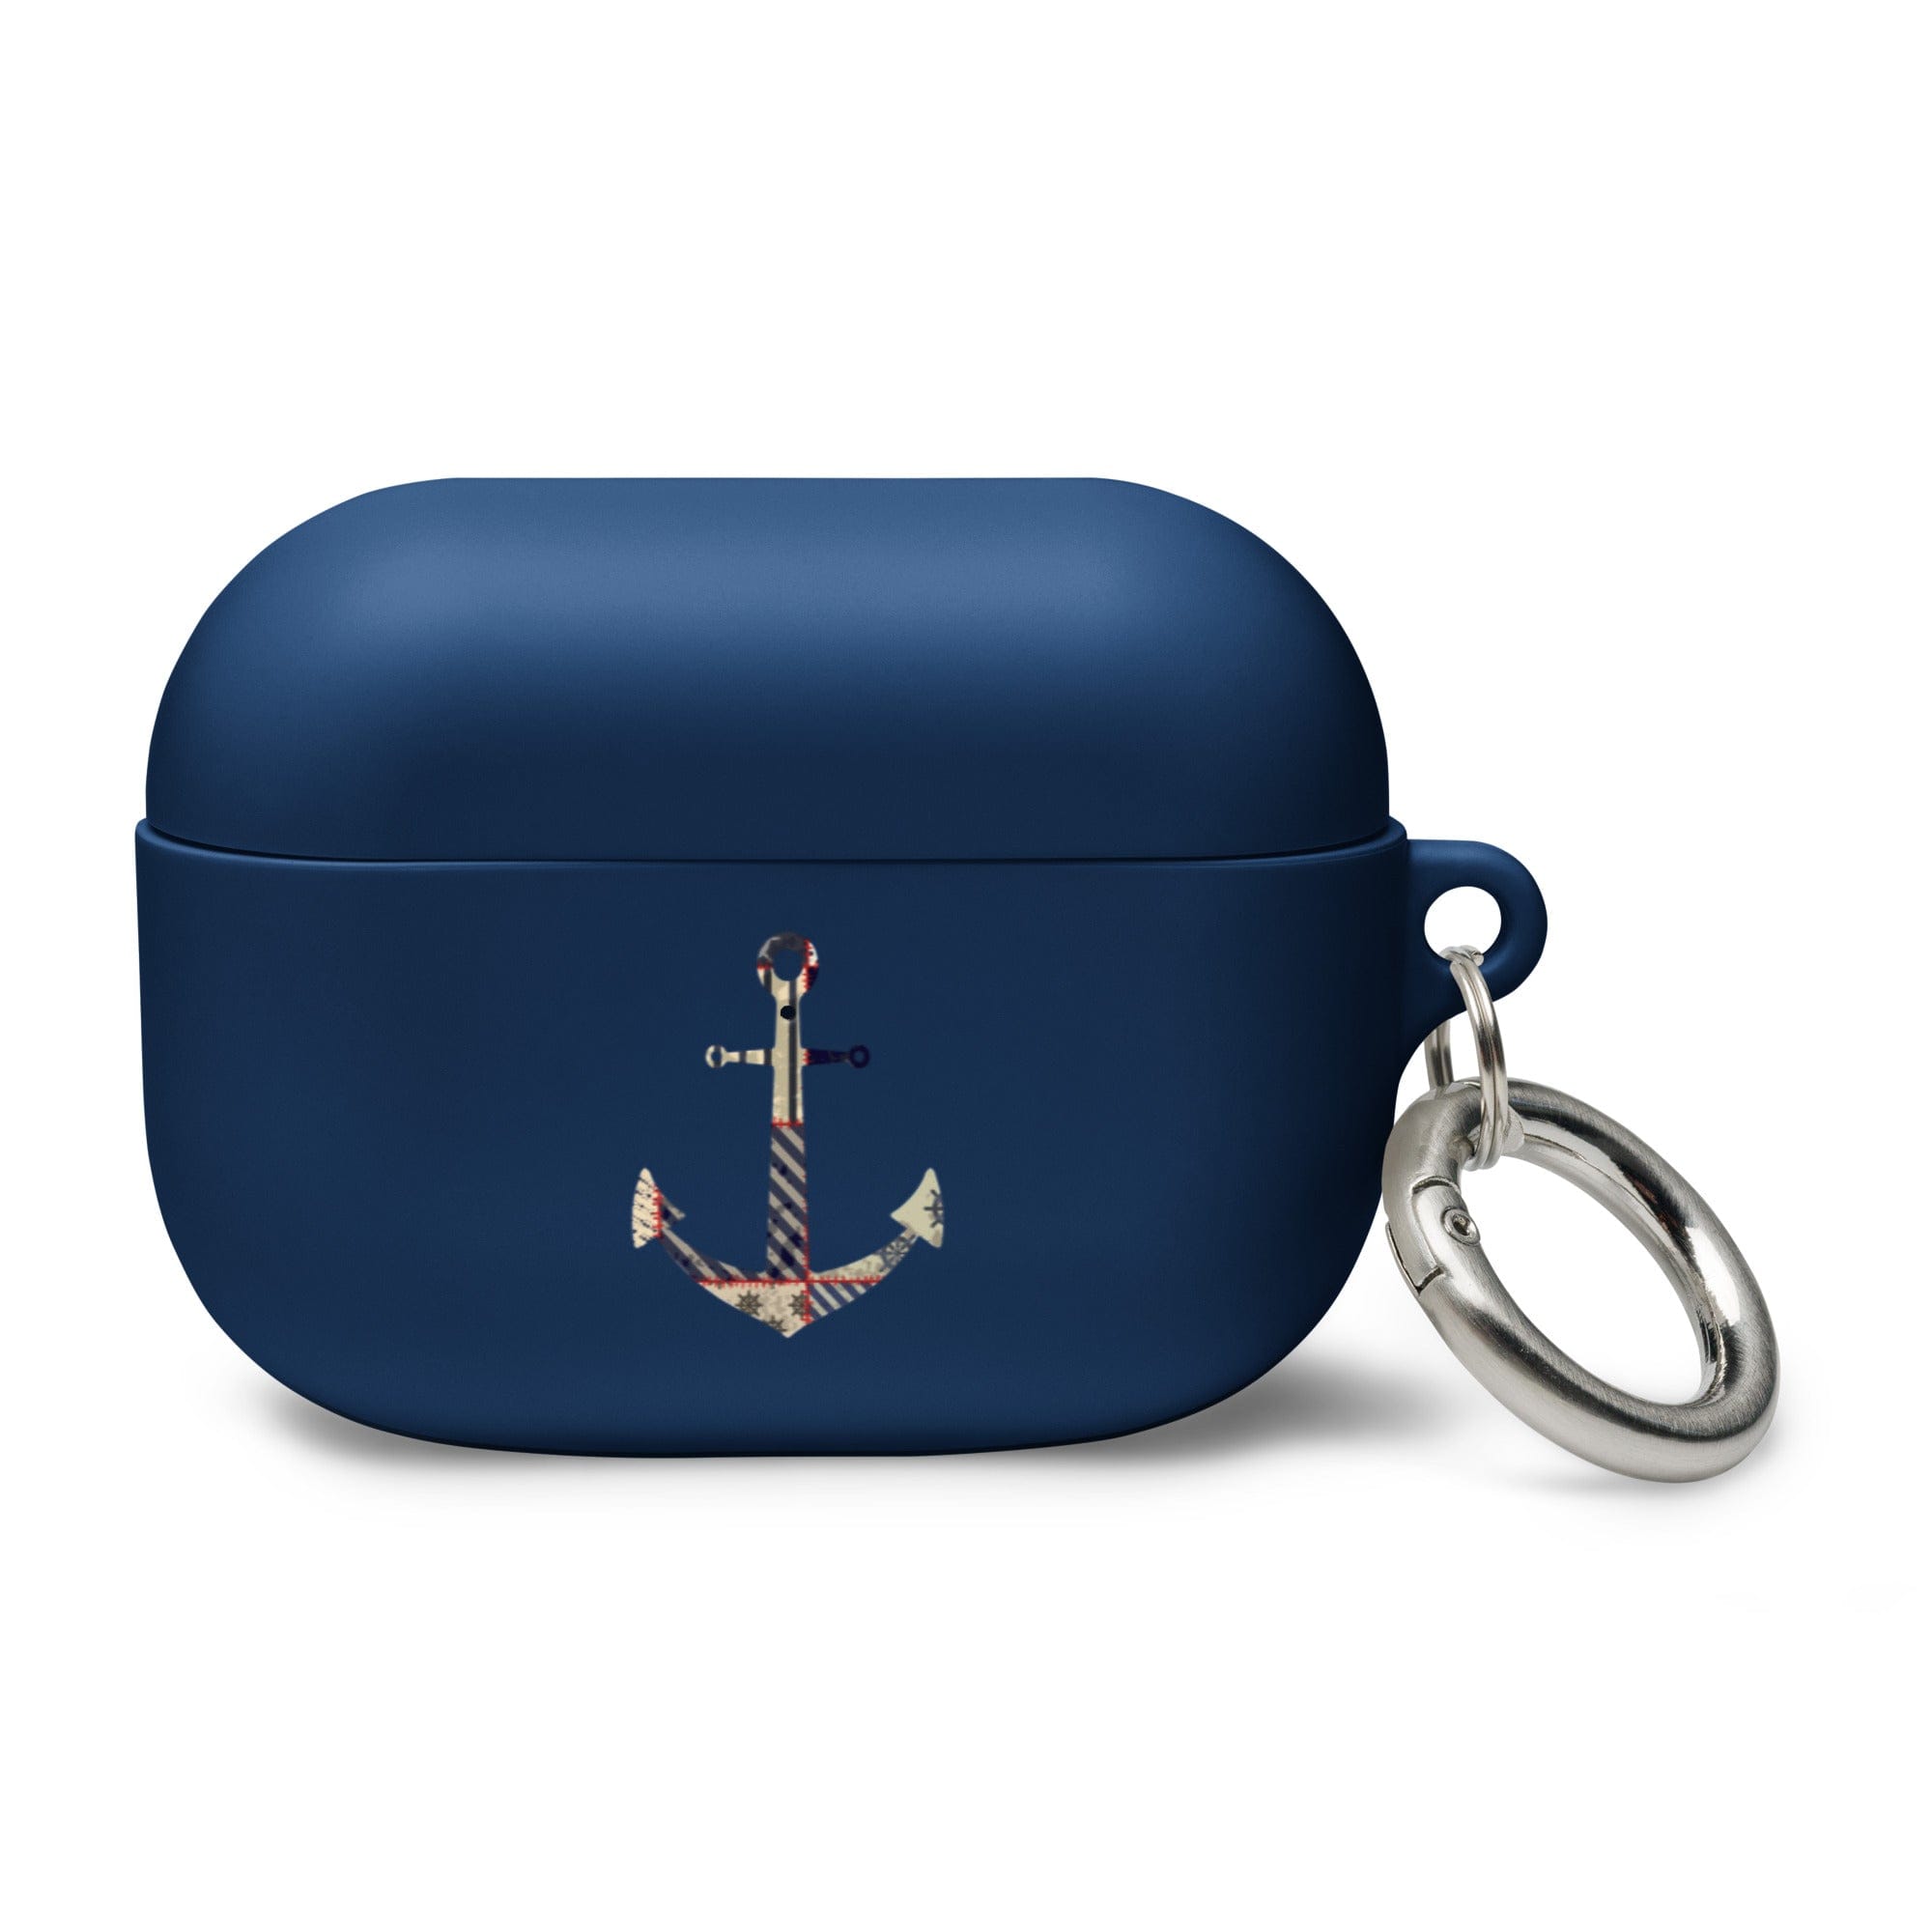 Sailor at heart. From the Marine collection.